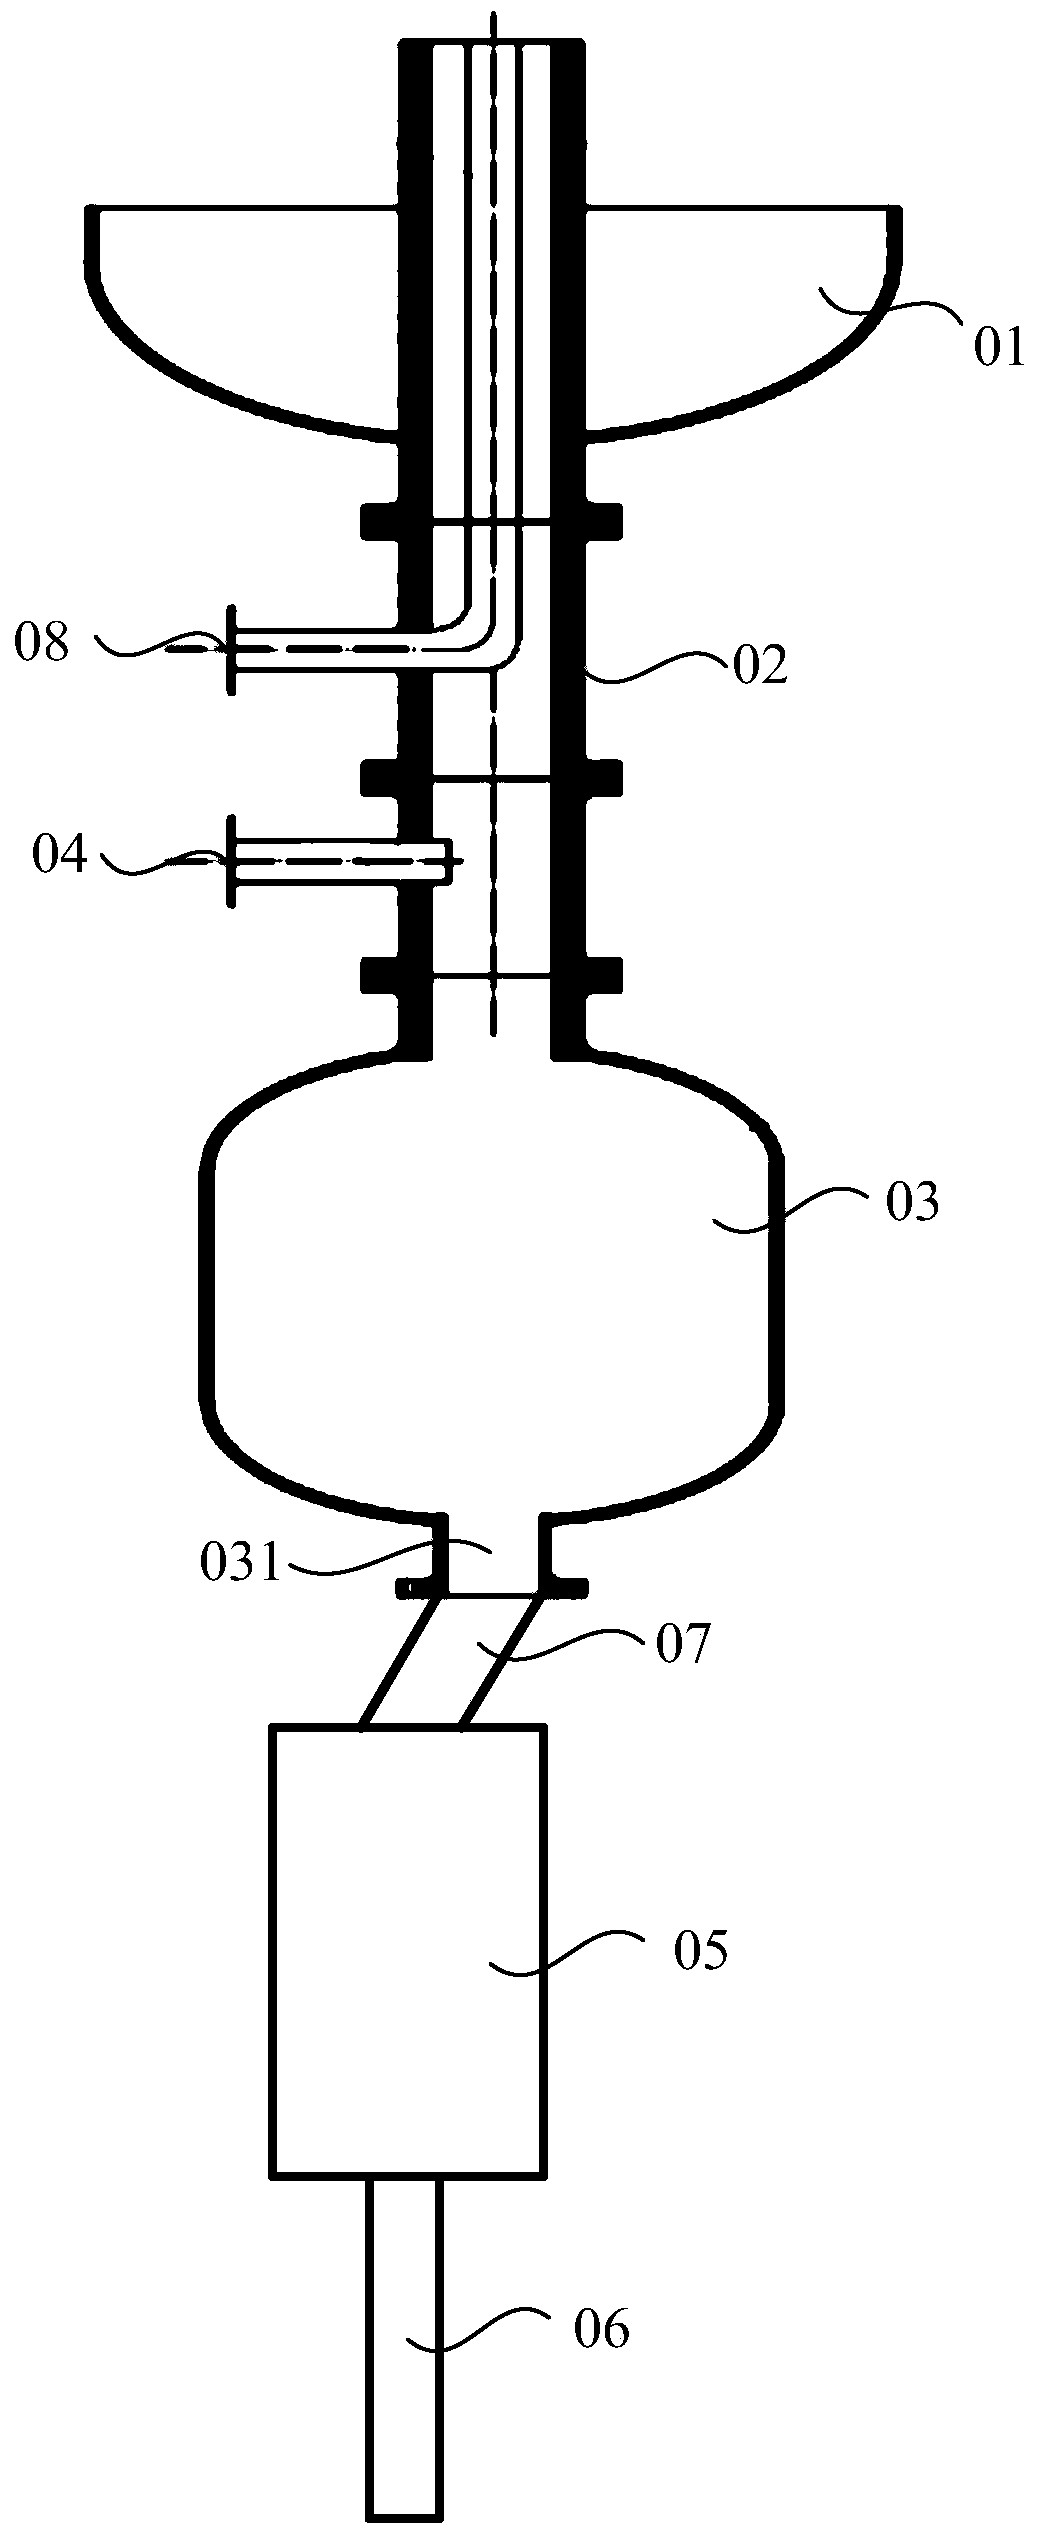 A fluidized bed gasification device